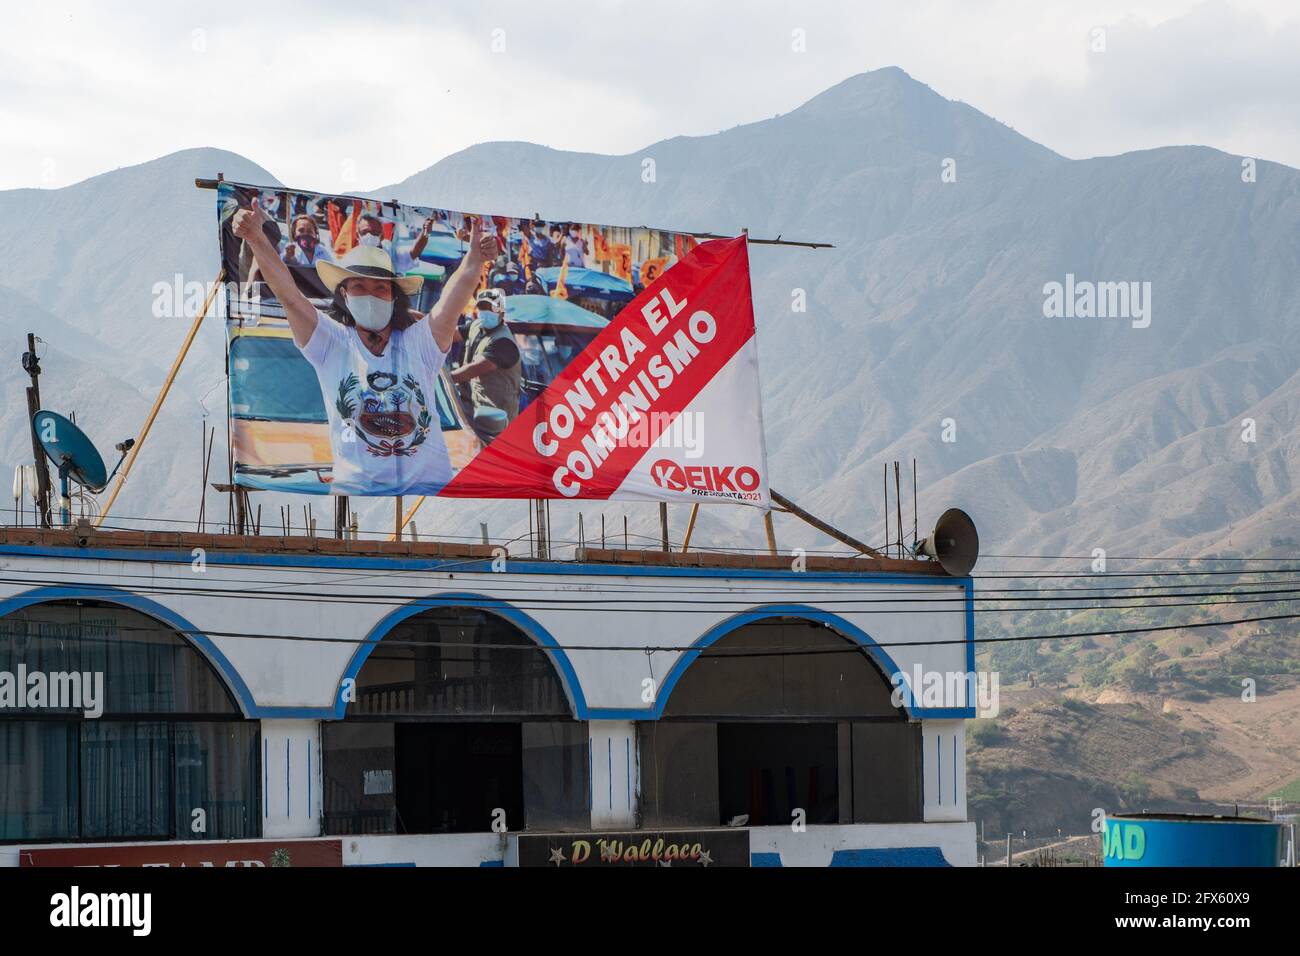 In a northern mountainous region of Peru, a presidential election banner supporting Keiko Fujimori declares her opposition to communism. Stock Photo